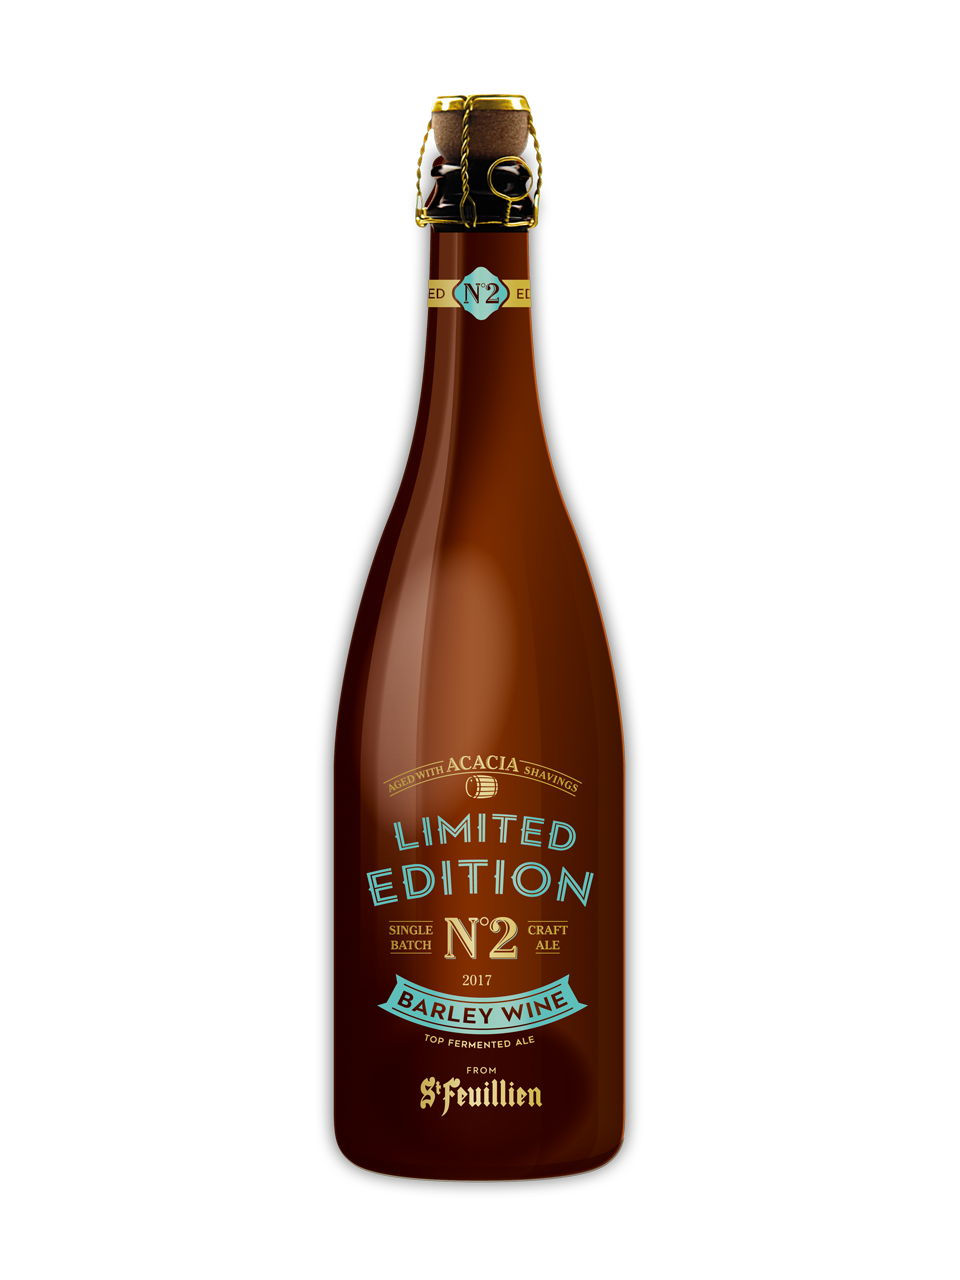 St. Feuillien Limited Edition Barley Wine